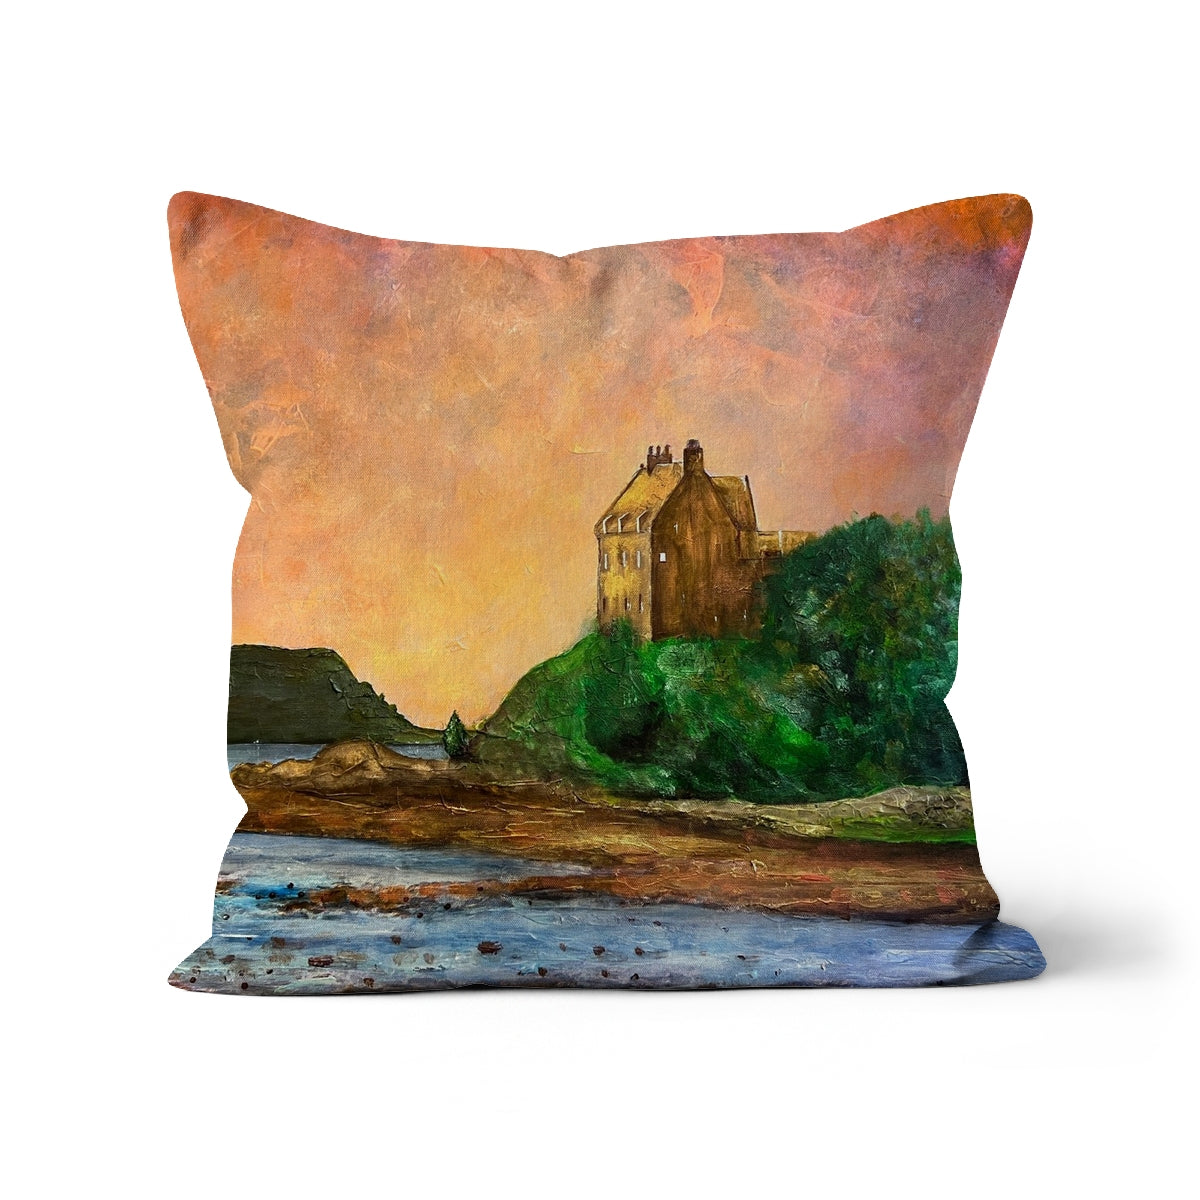 Duntrune Castle Art Gifts Cushion-Cushions-Historic & Iconic Scotland Art Gallery-Canvas-22"x22"-Paintings, Prints, Homeware, Art Gifts From Scotland By Scottish Artist Kevin Hunter